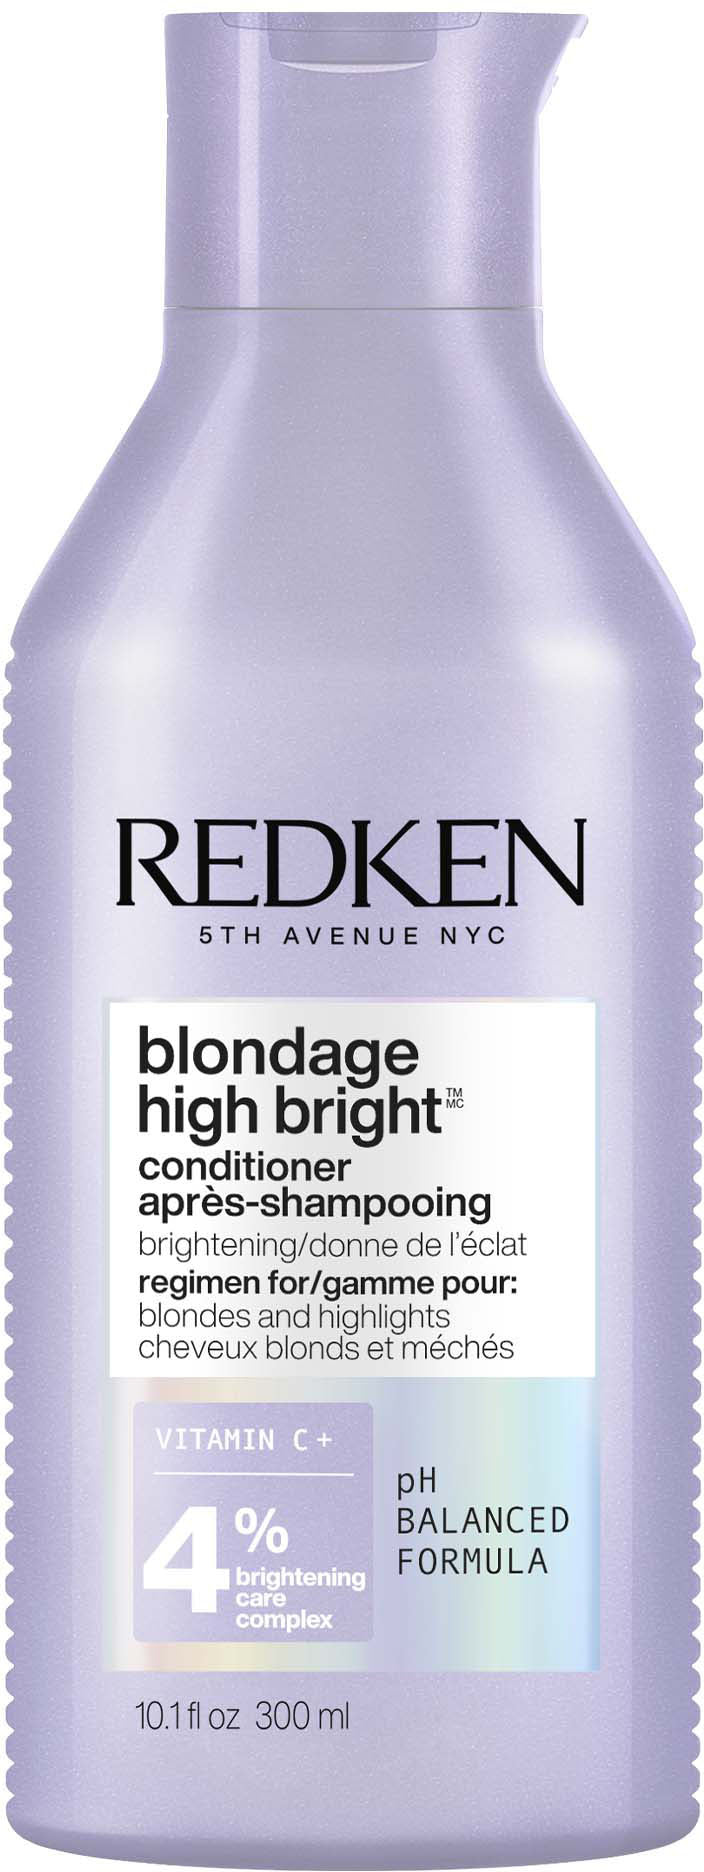 Blondage High Bright Conditionner